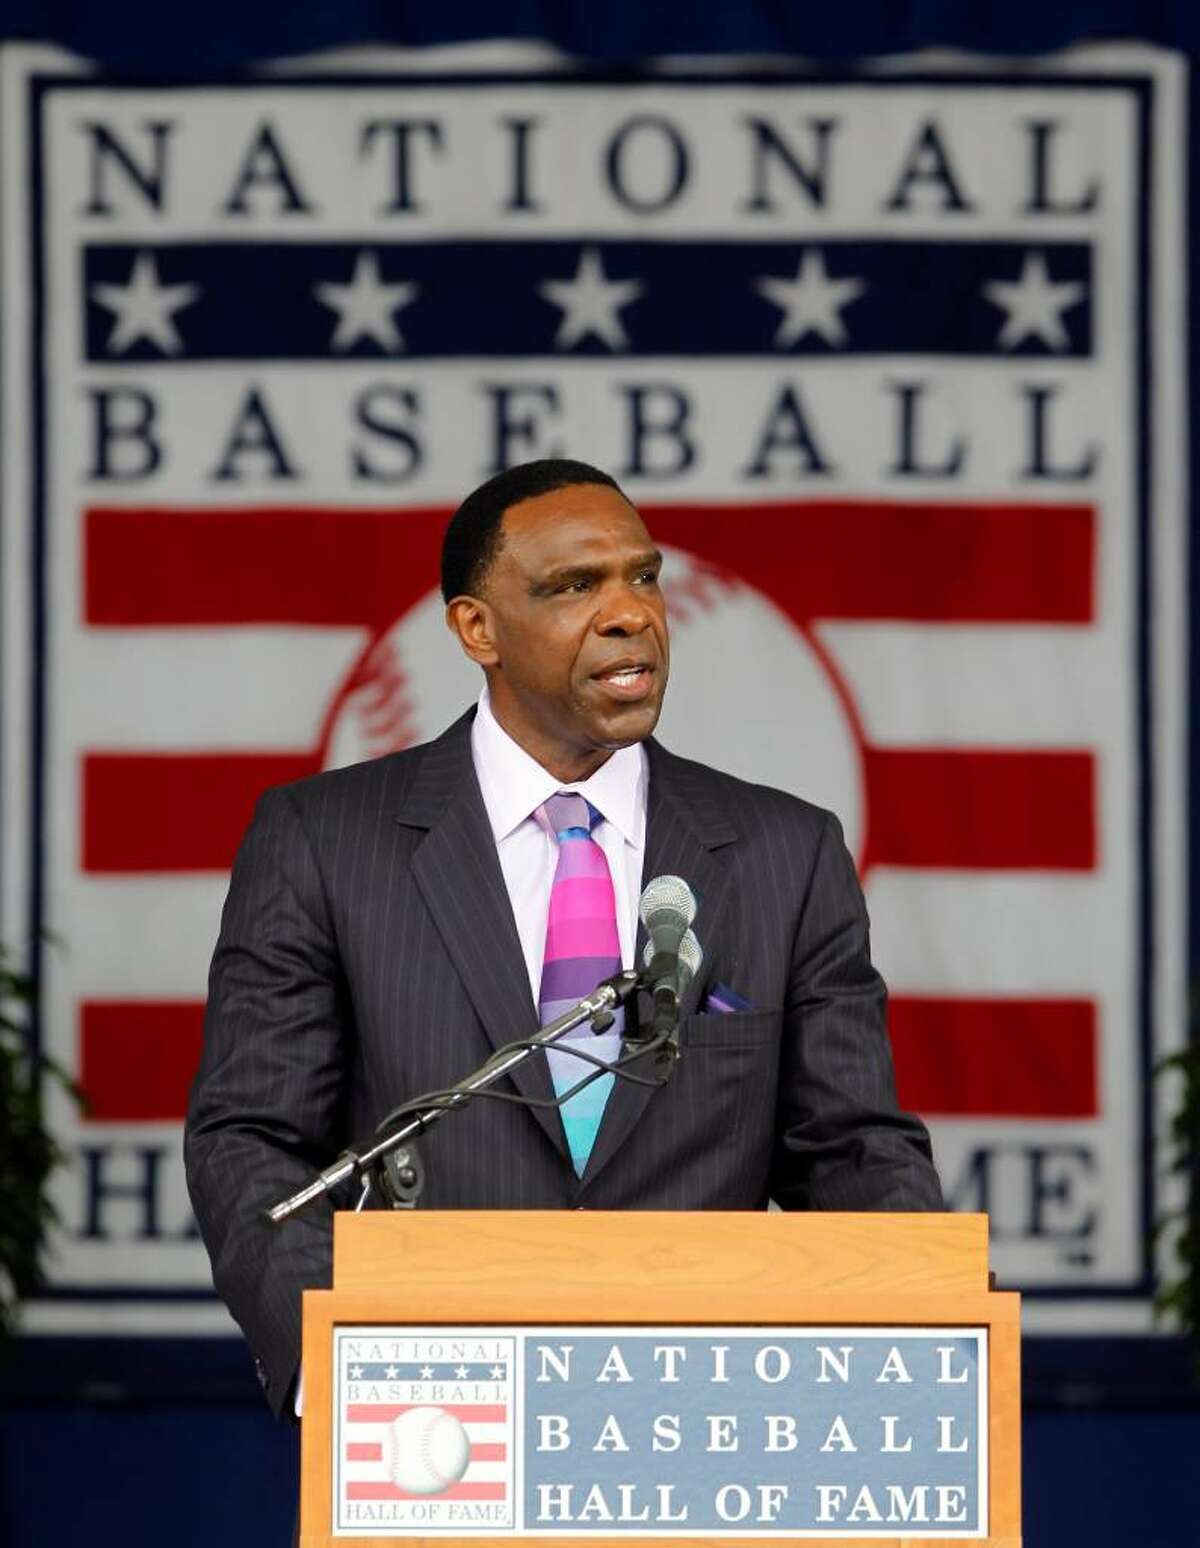 Andre Dawson delivers his Baseball Hall of Fame induction speech during a ceremony at the Clark Sports Center in Cooperstown, N.Y., on Sunday, July 25, 2010. (AP Photo/Mike Groll)